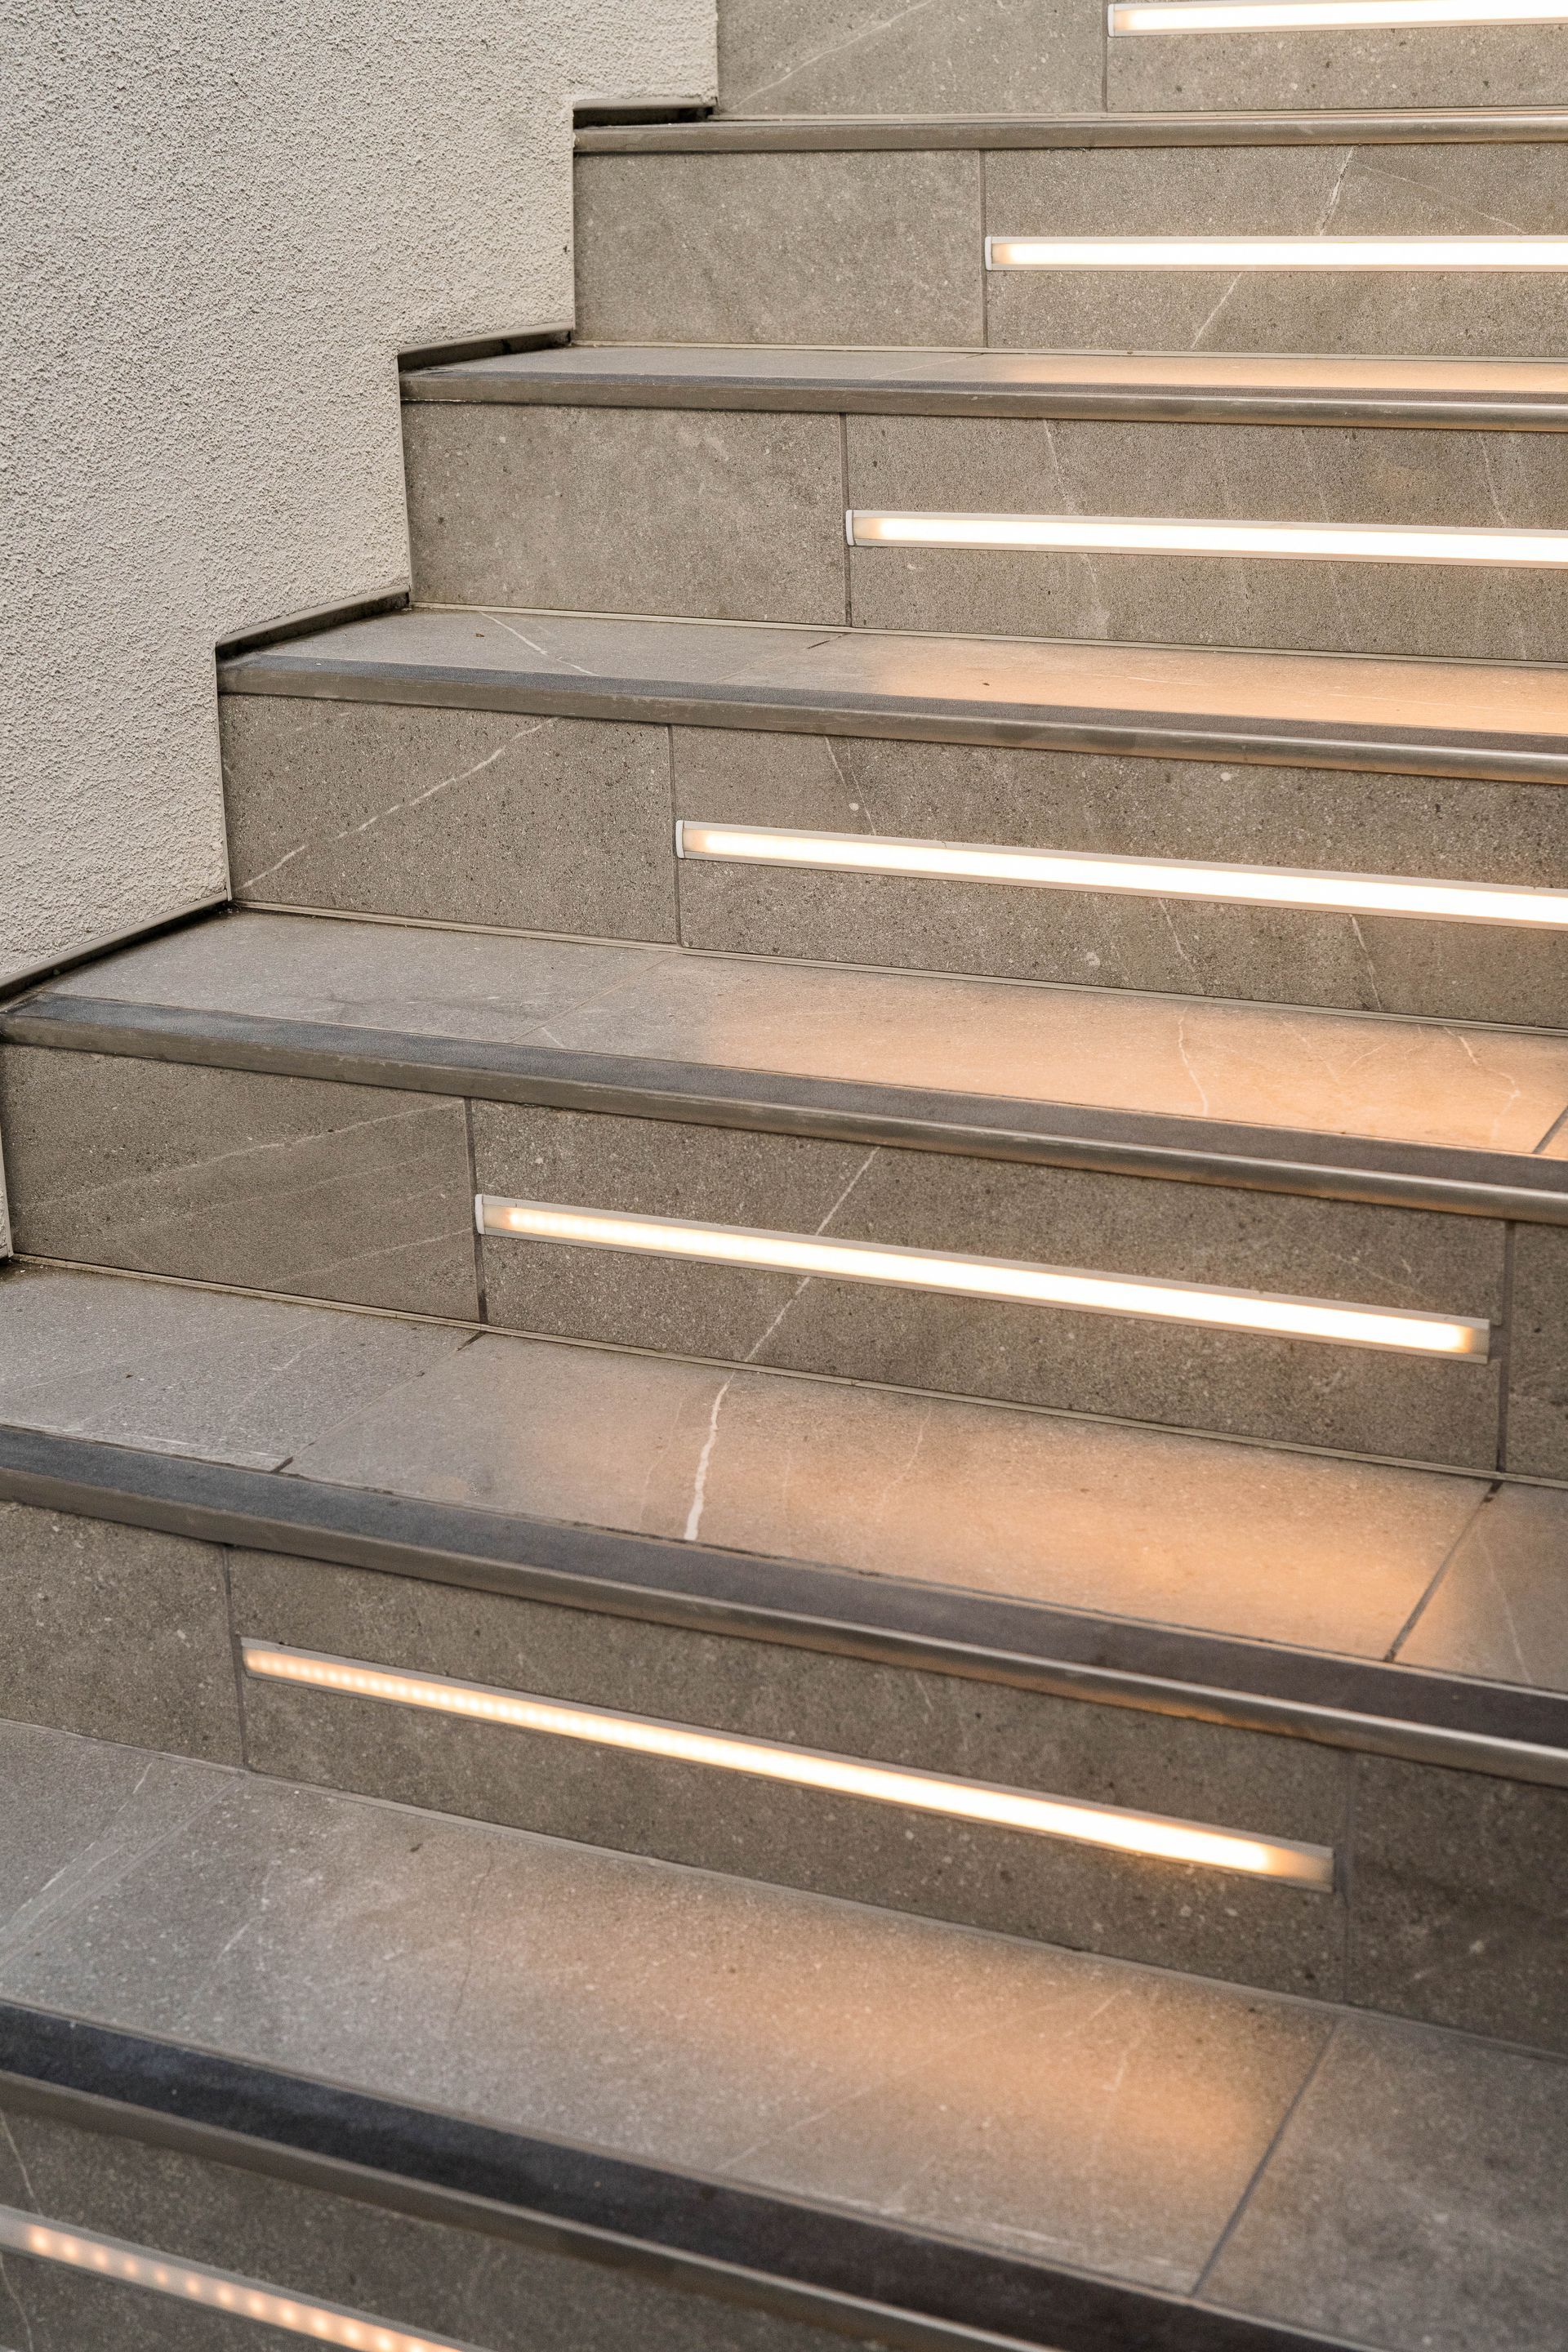 a set of stairs with lights on the steps